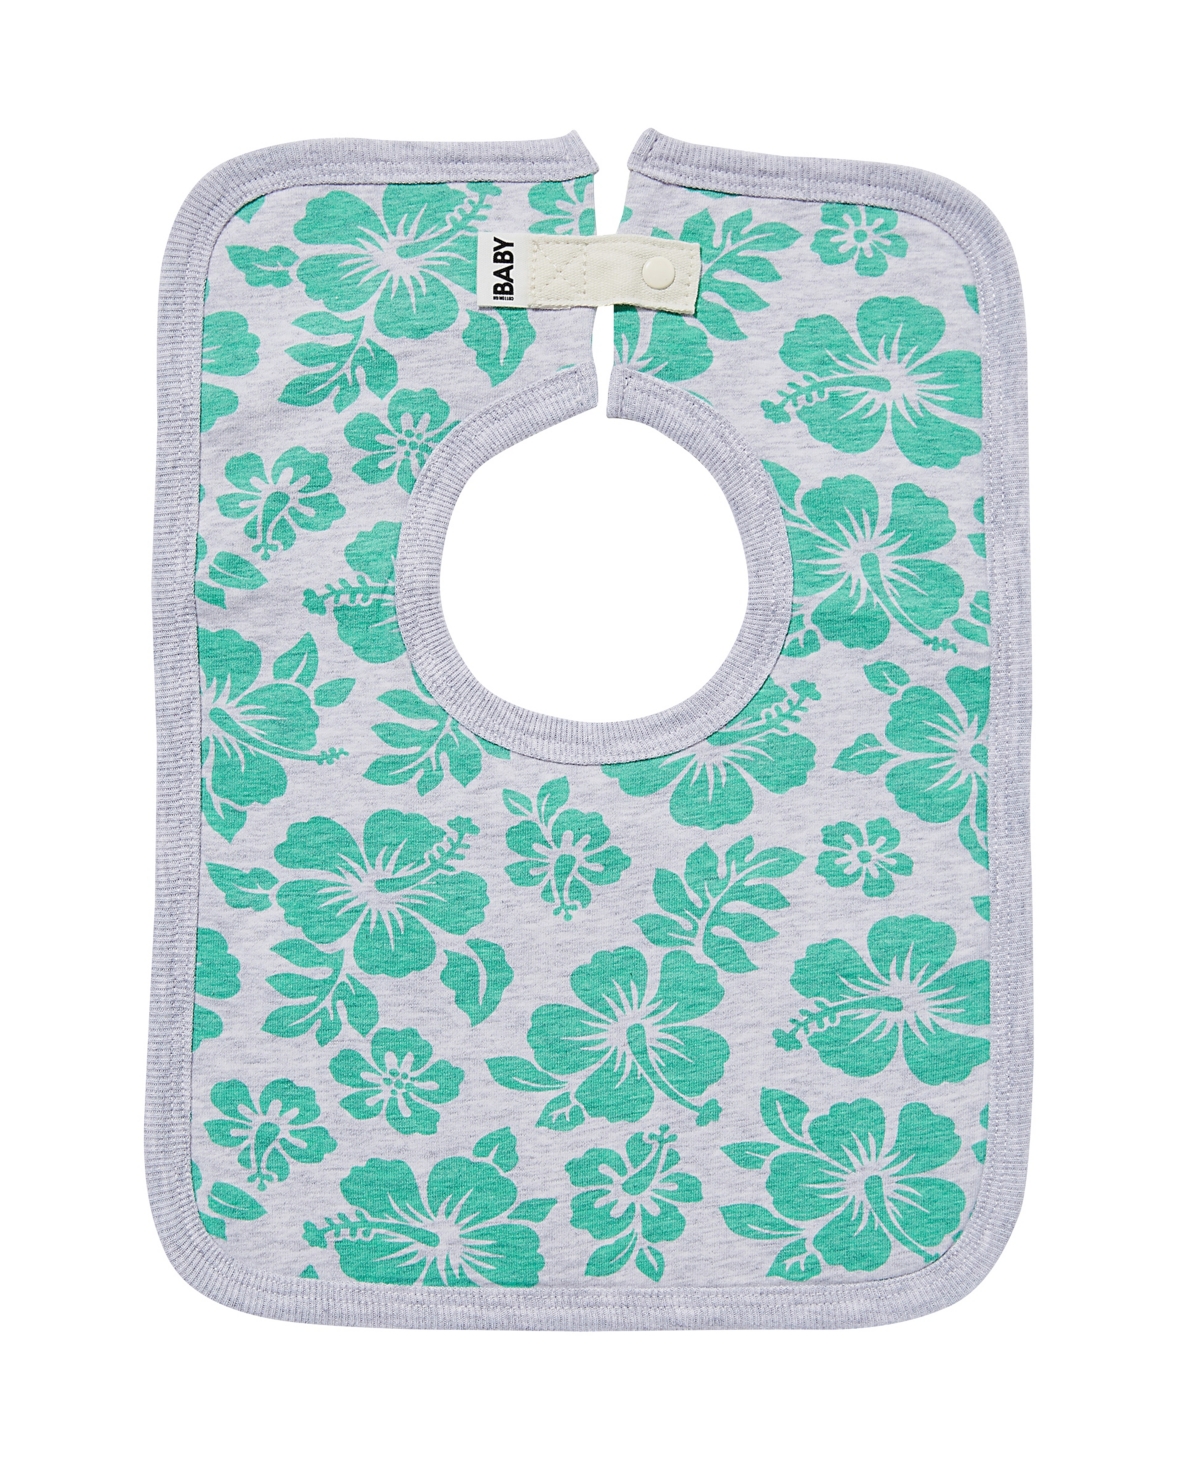 Cotton On Baby Unisex The Square Bib In Cloud Marle/green Houla